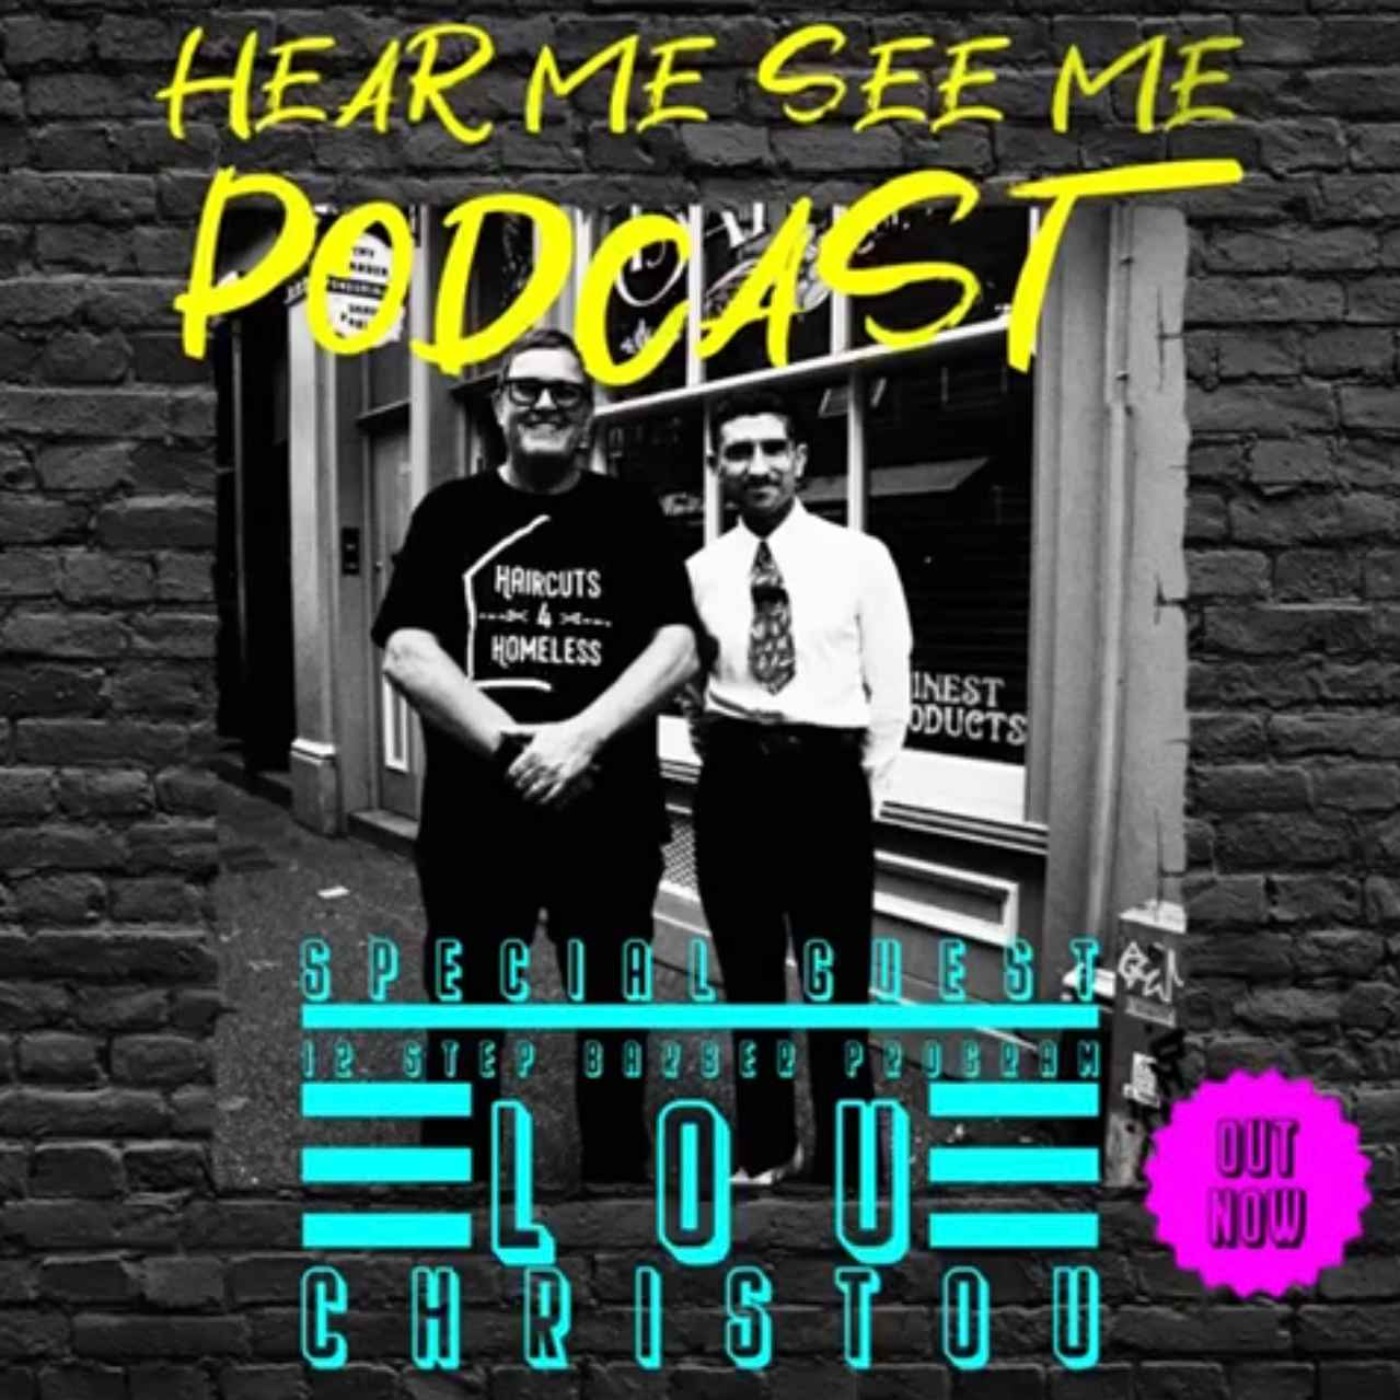 cover art for Hear Me, See Me Podcast with Lou Christou, 12 step barber program founder. 